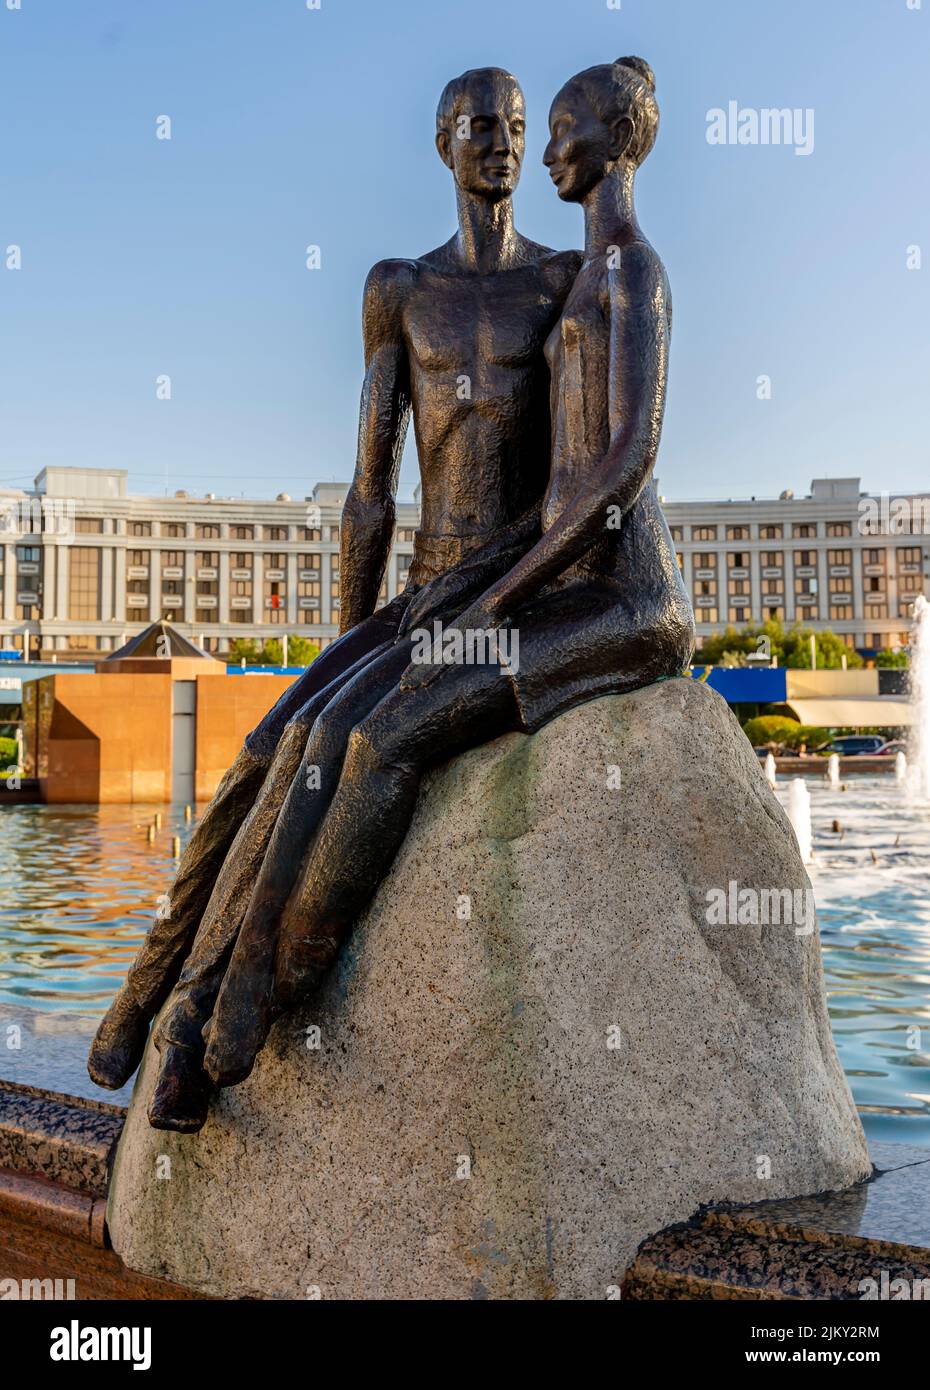 Statue depicting Kazakh man and woman sitting on the stone near fountain in central Nur-Sultan, Astana, Kazakhstan Stock Photo